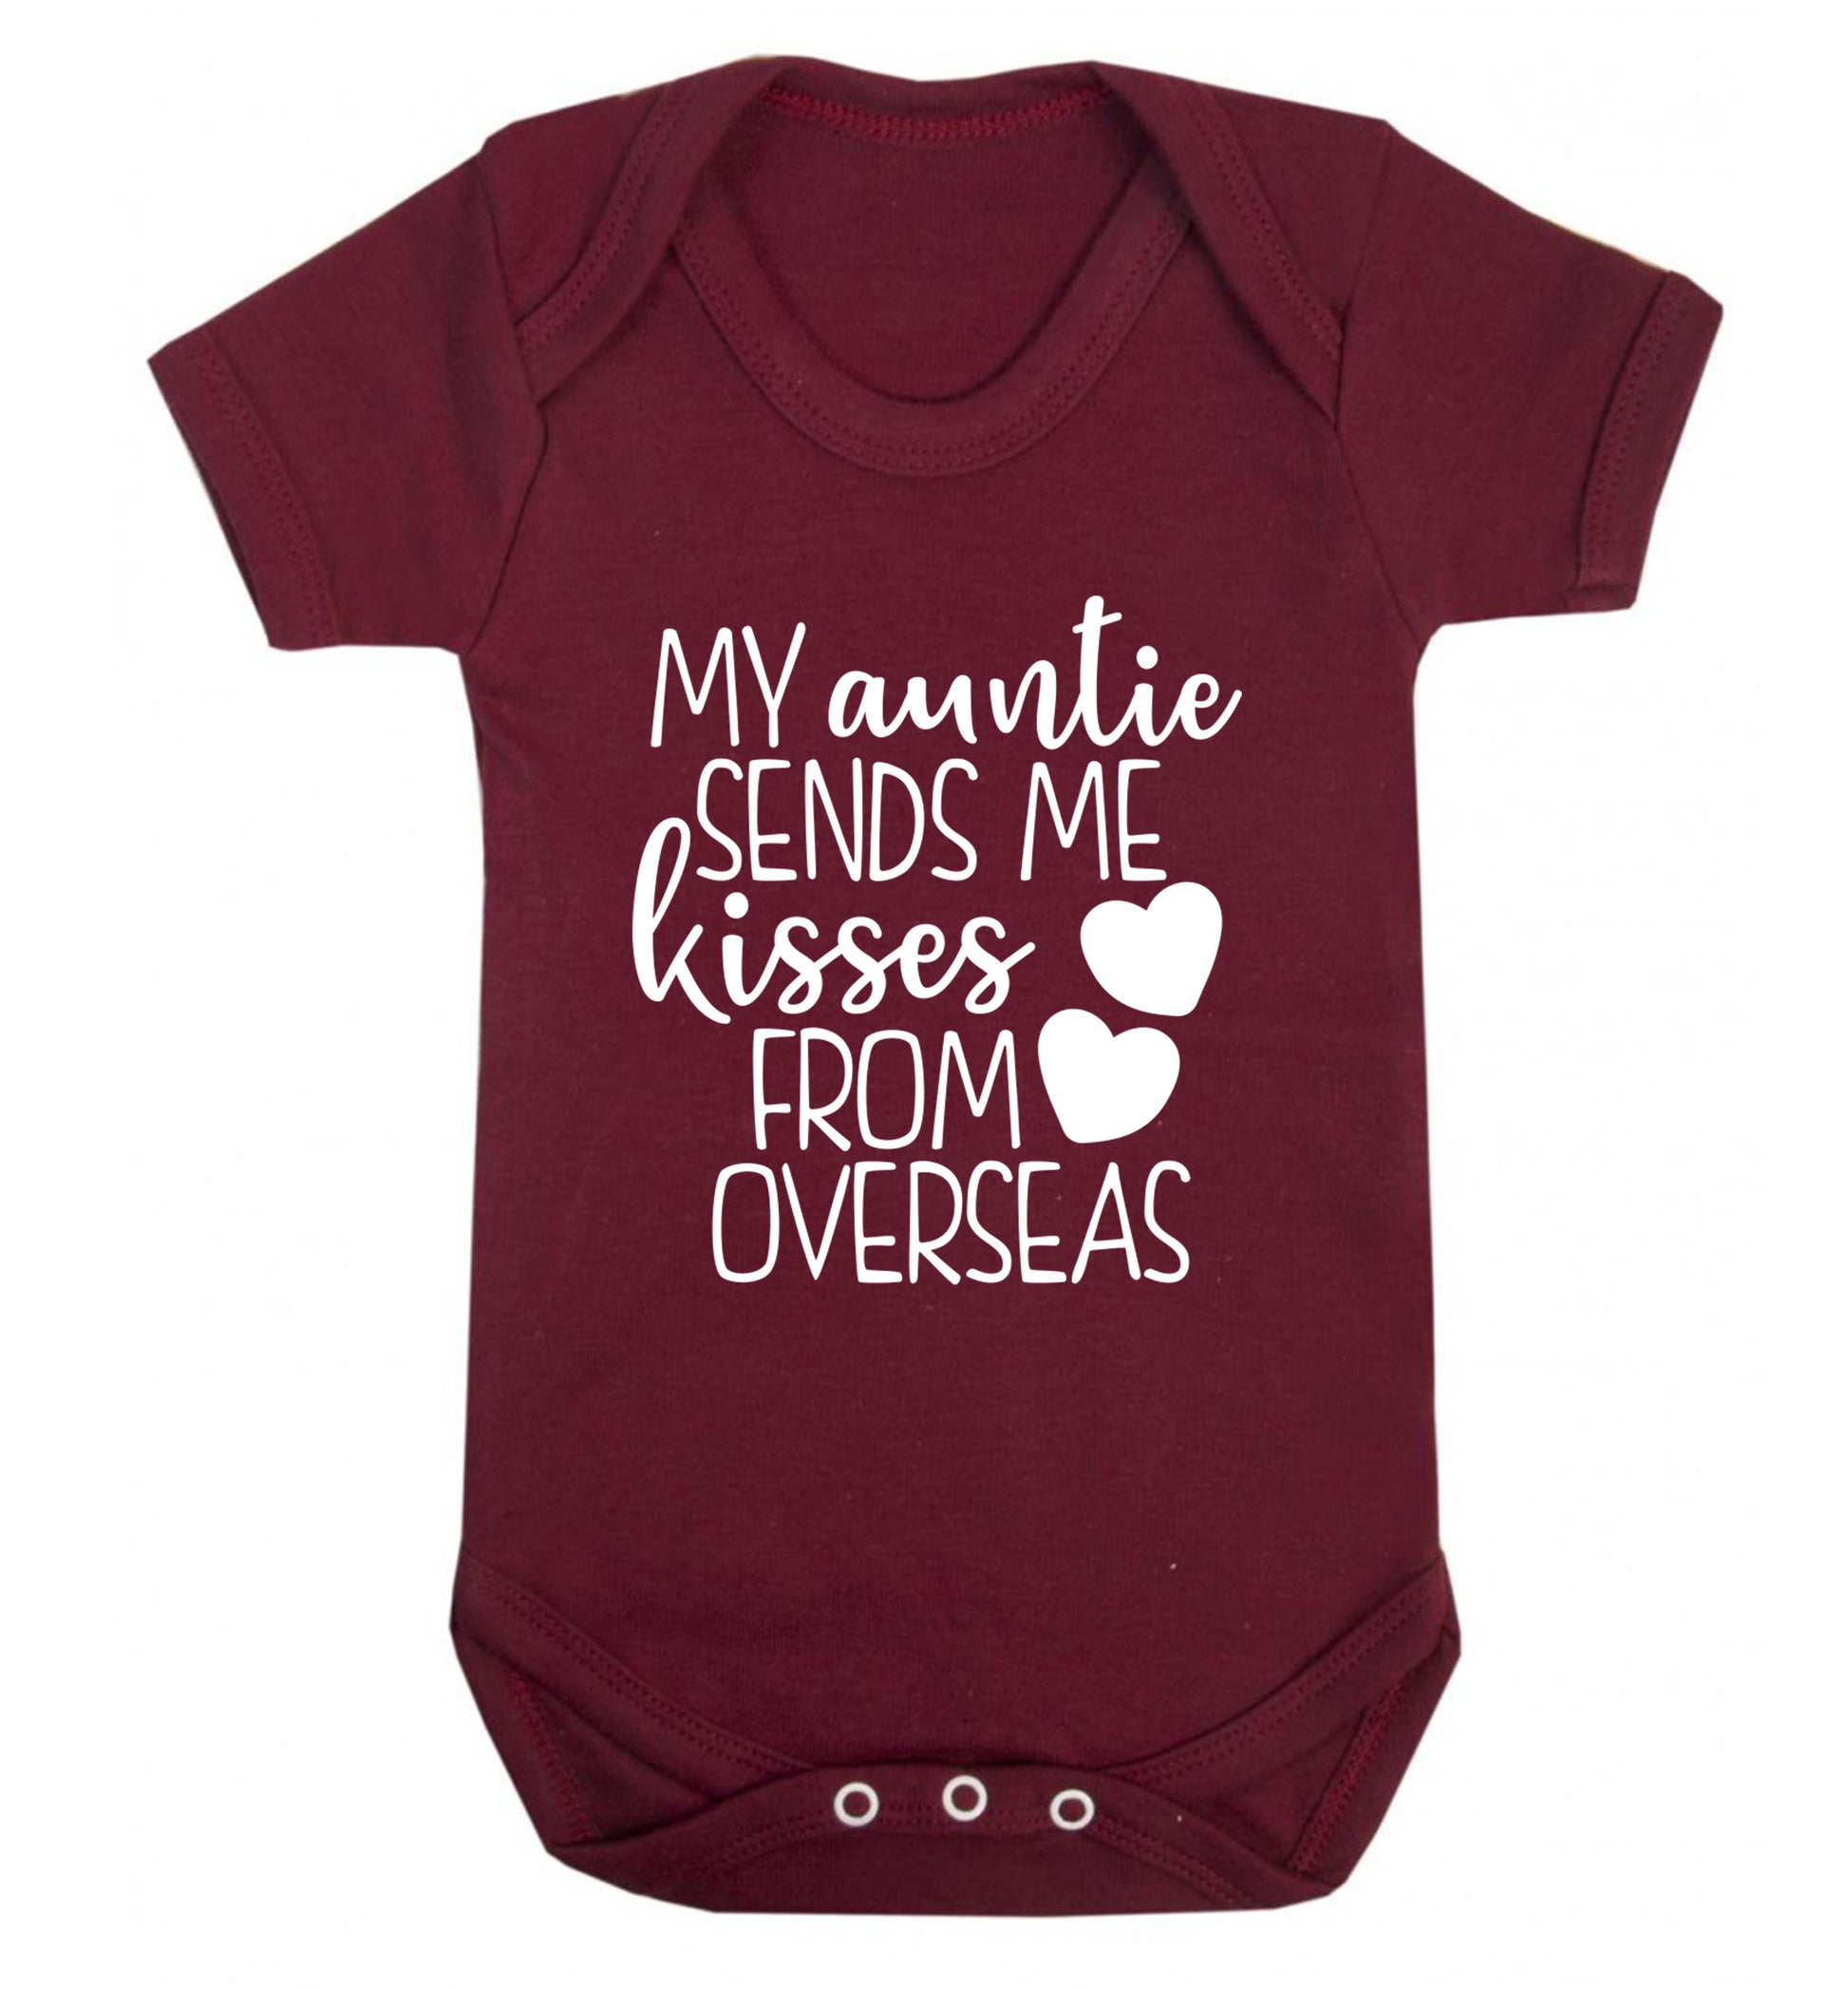 My auntie sends me kisses from overseas Baby Vest maroon 18-24 months